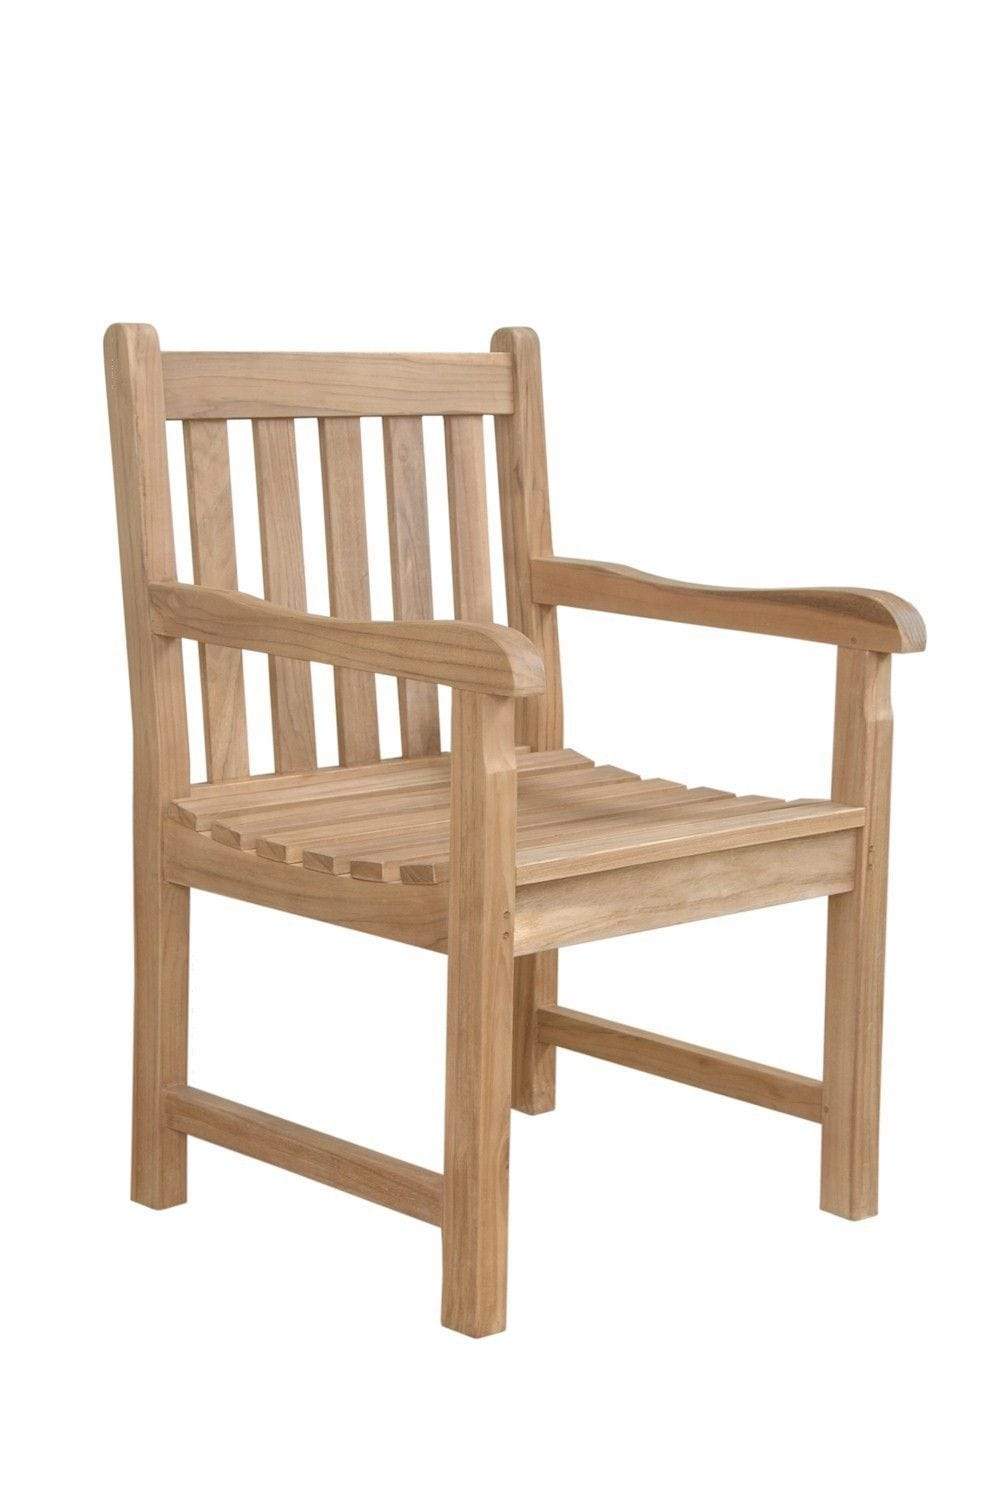 Anderson Teak Outdoor Dining Chairs Anderson Teak Braxton Dining Armchair